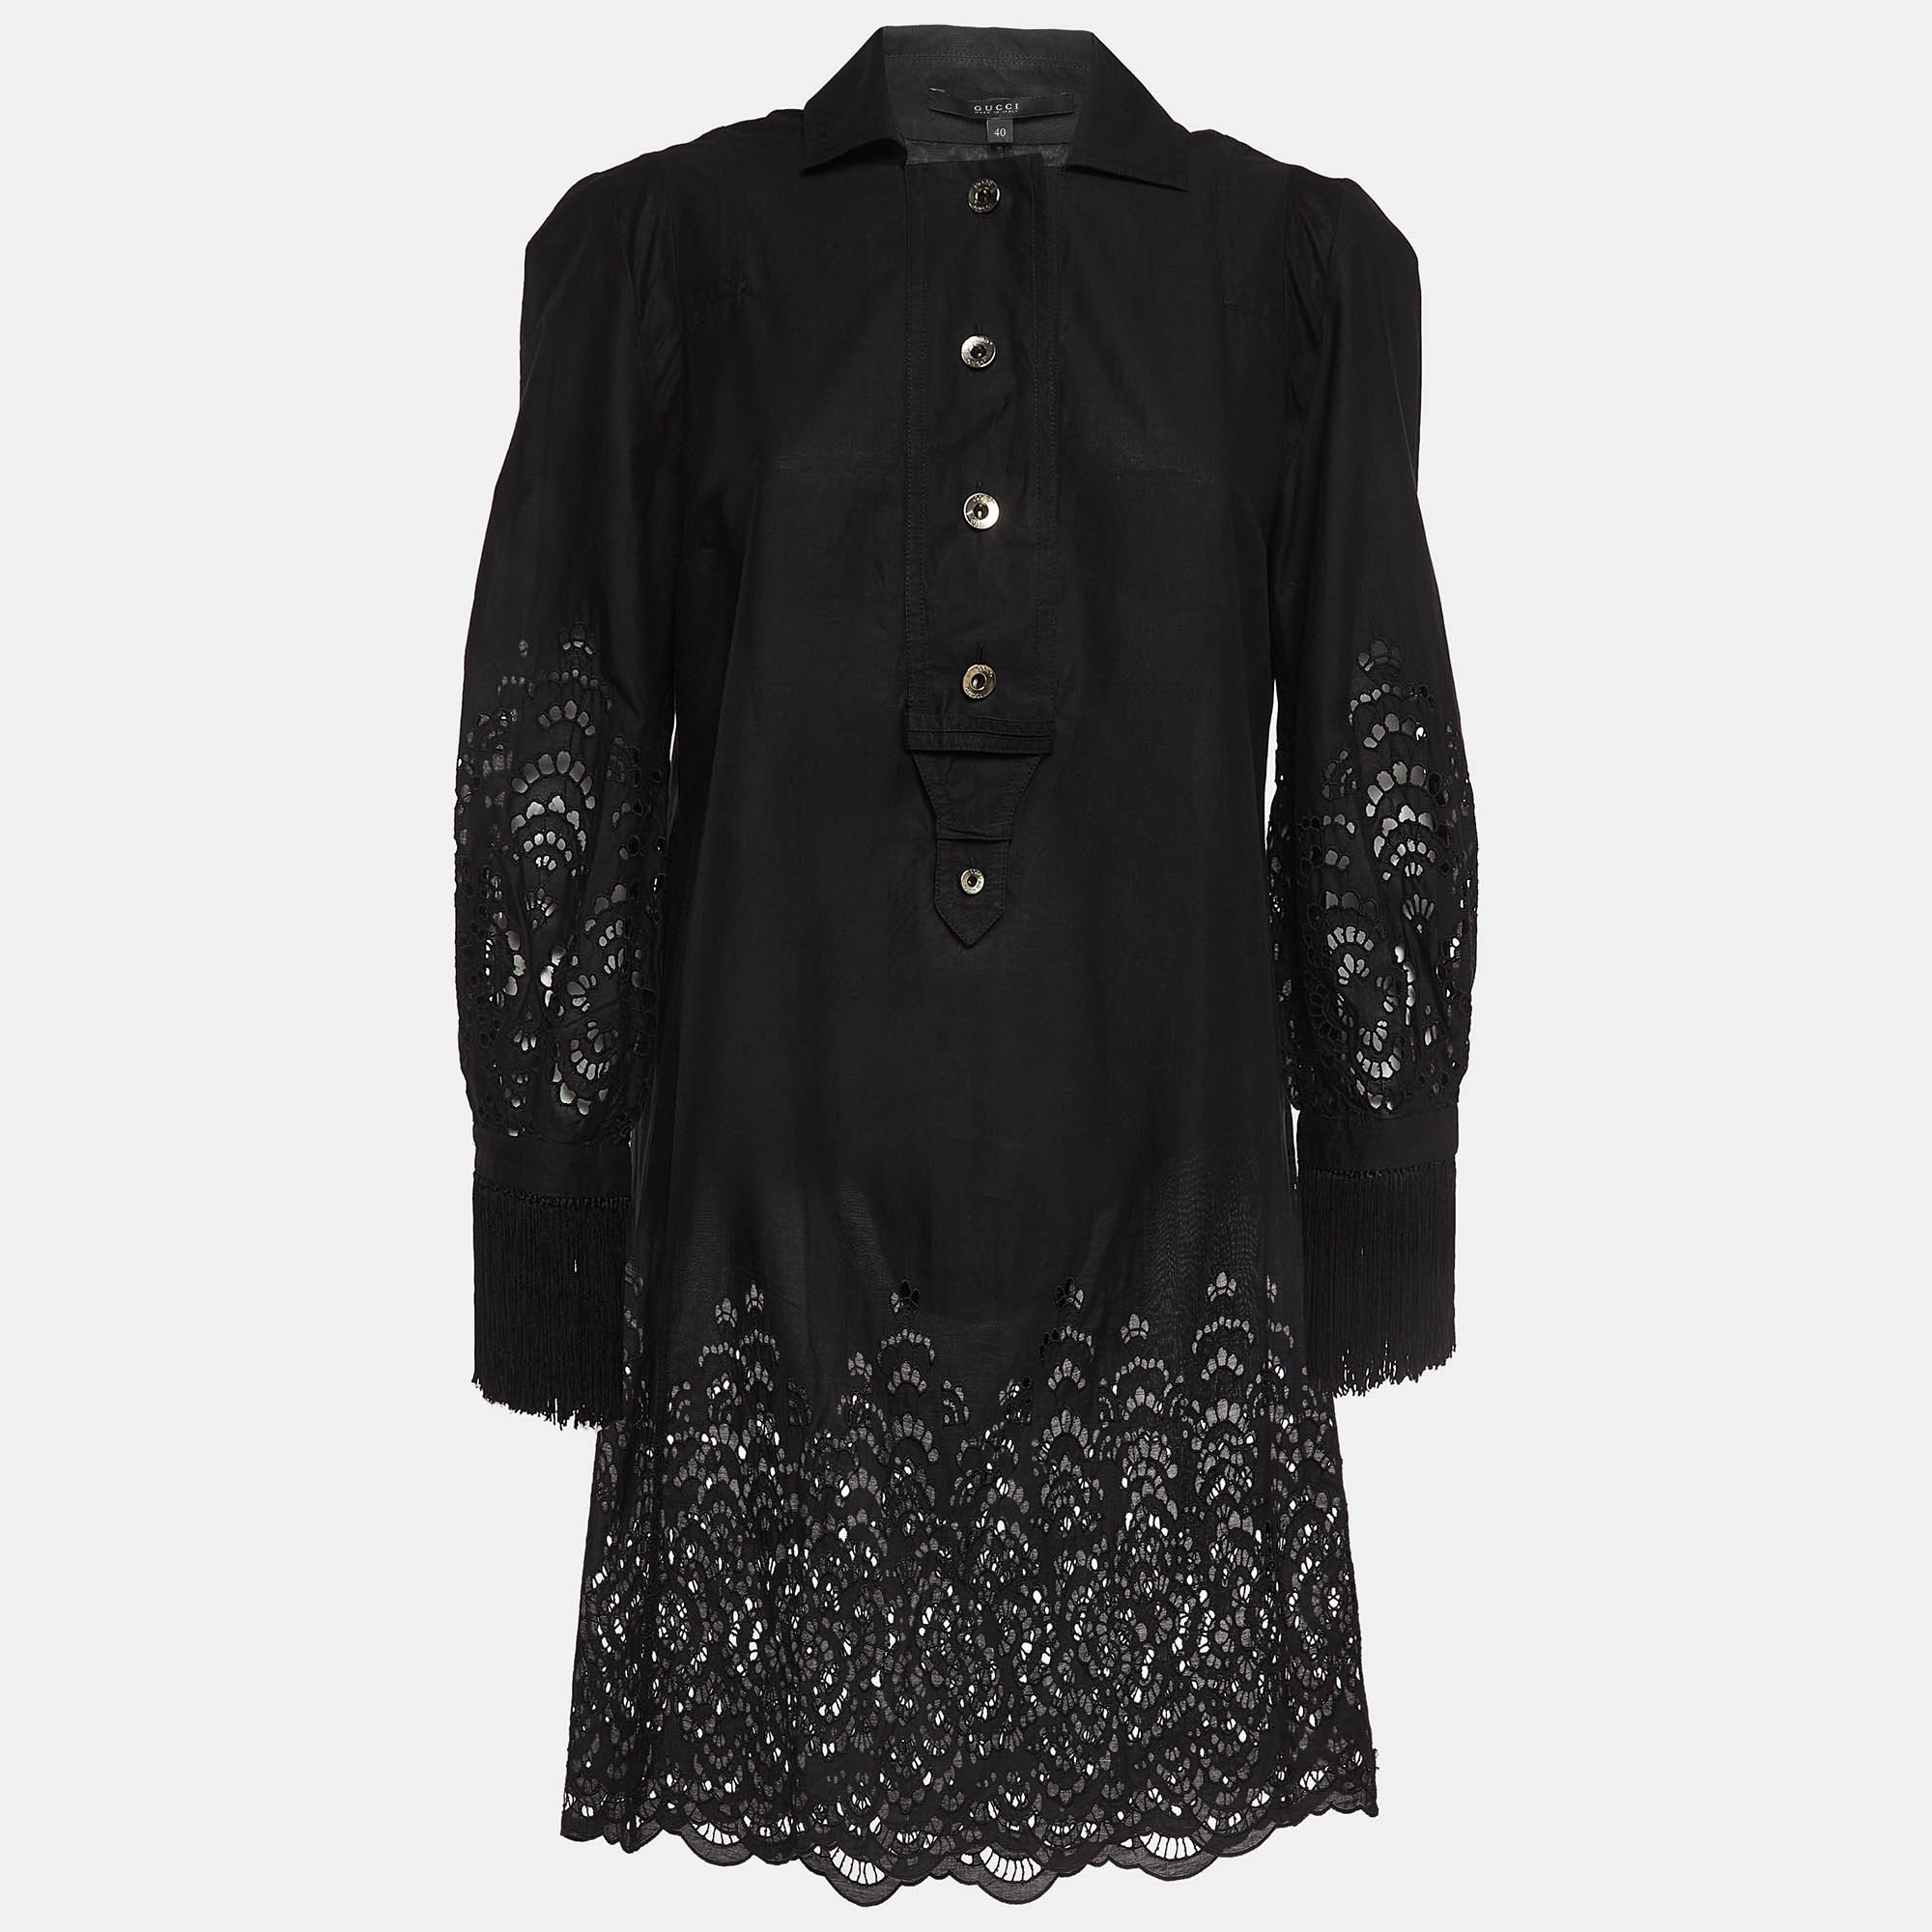 Gucci black eyelet embroidered cotton short dress s